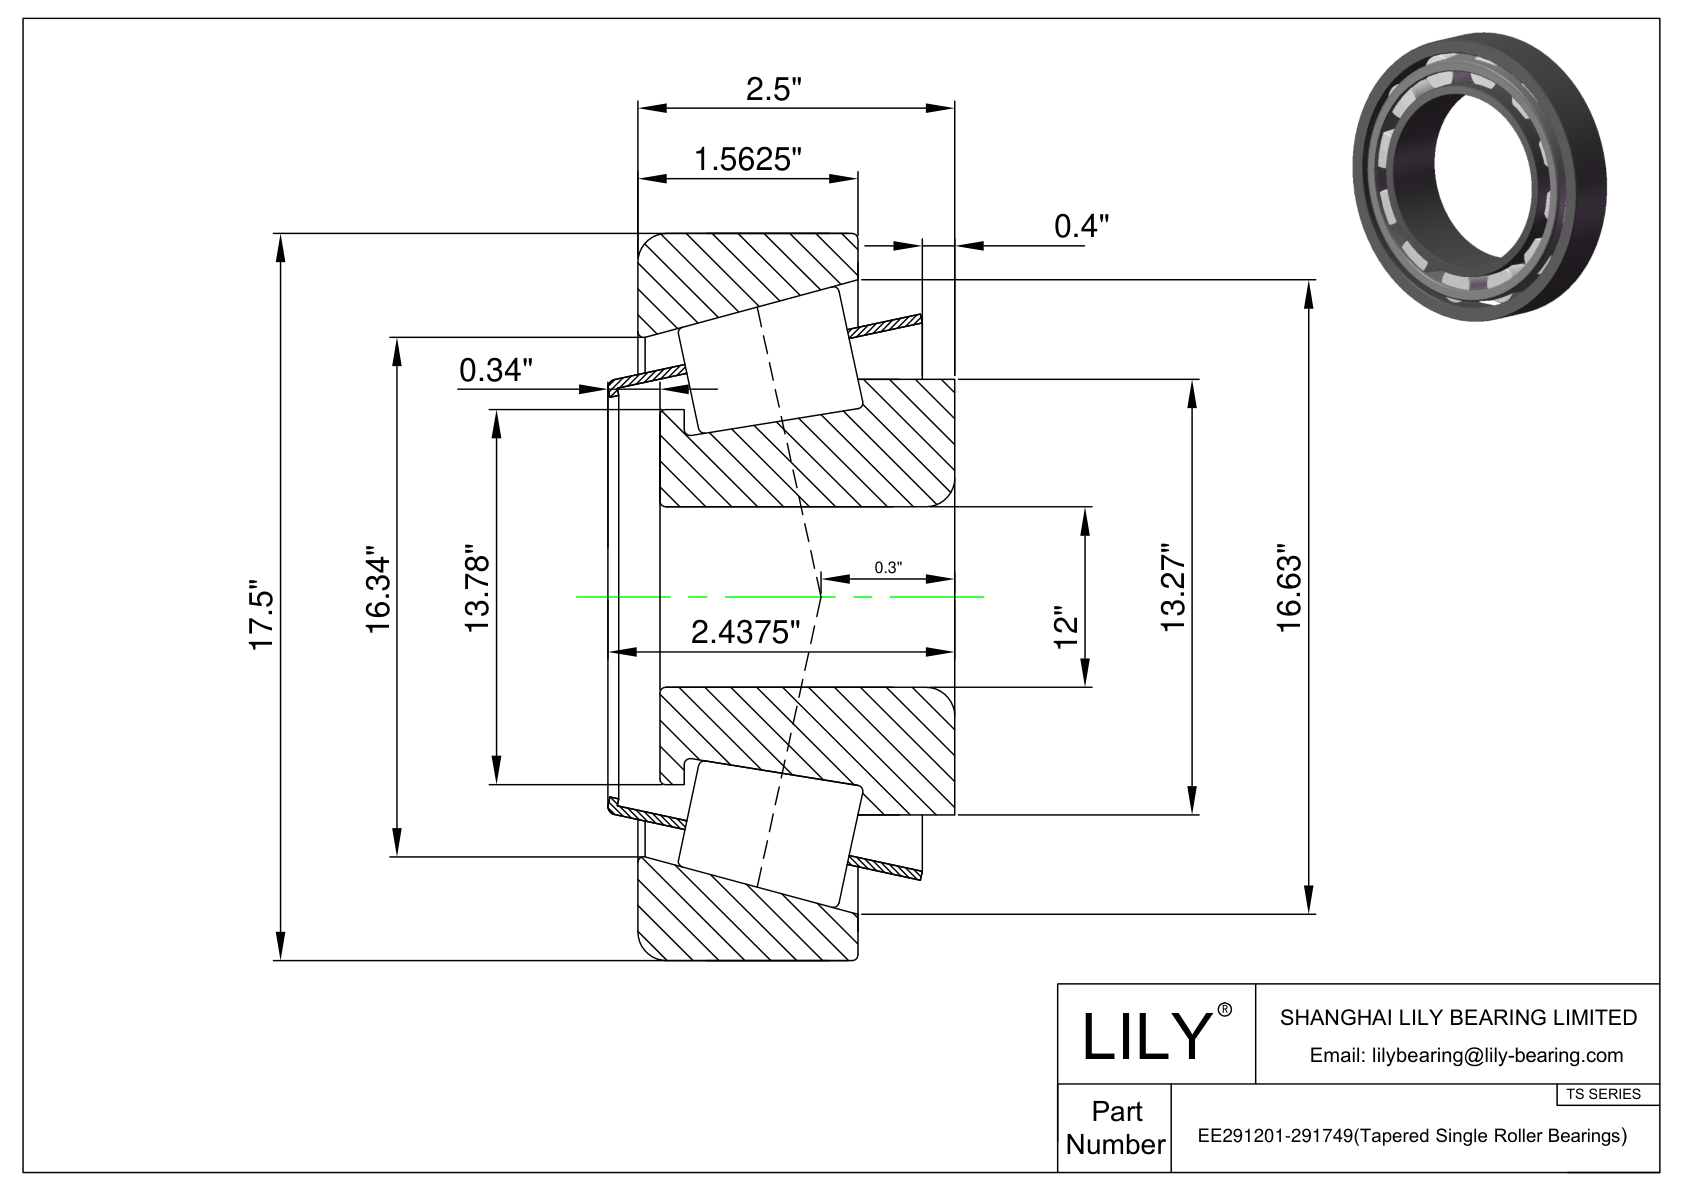 EE291201-291749 TS (Tapered Single Roller Bearings) (Imperial) cad drawing